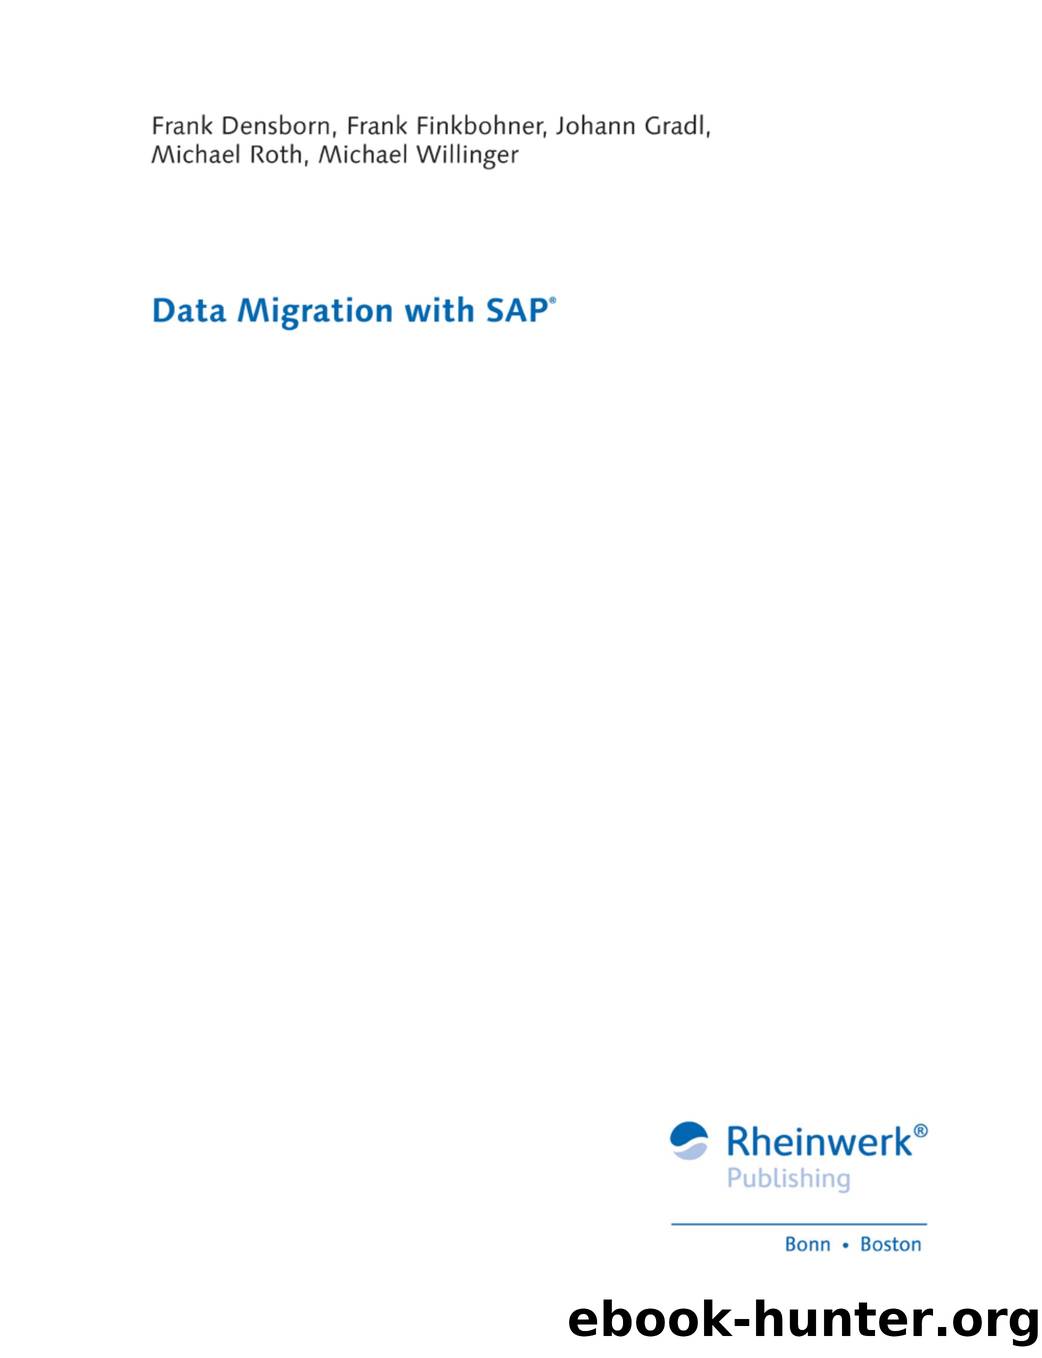 Data Migration with SAP by Unknown